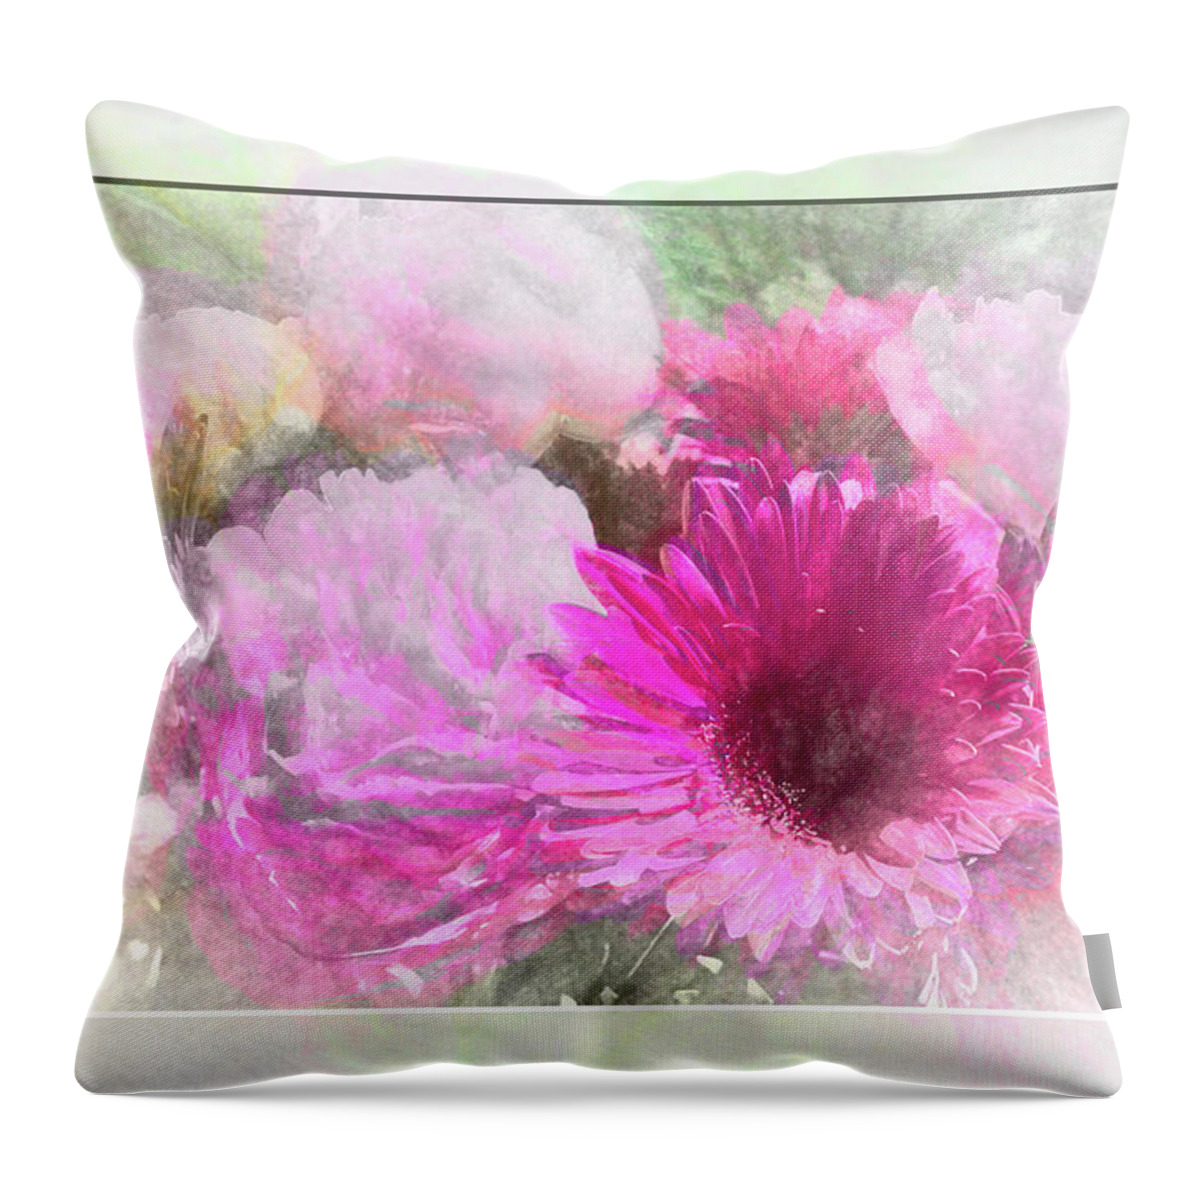 Flower Impressions Throw Pillow featuring the photograph Soft Pink Gerbera by Natalie Rotman Cote